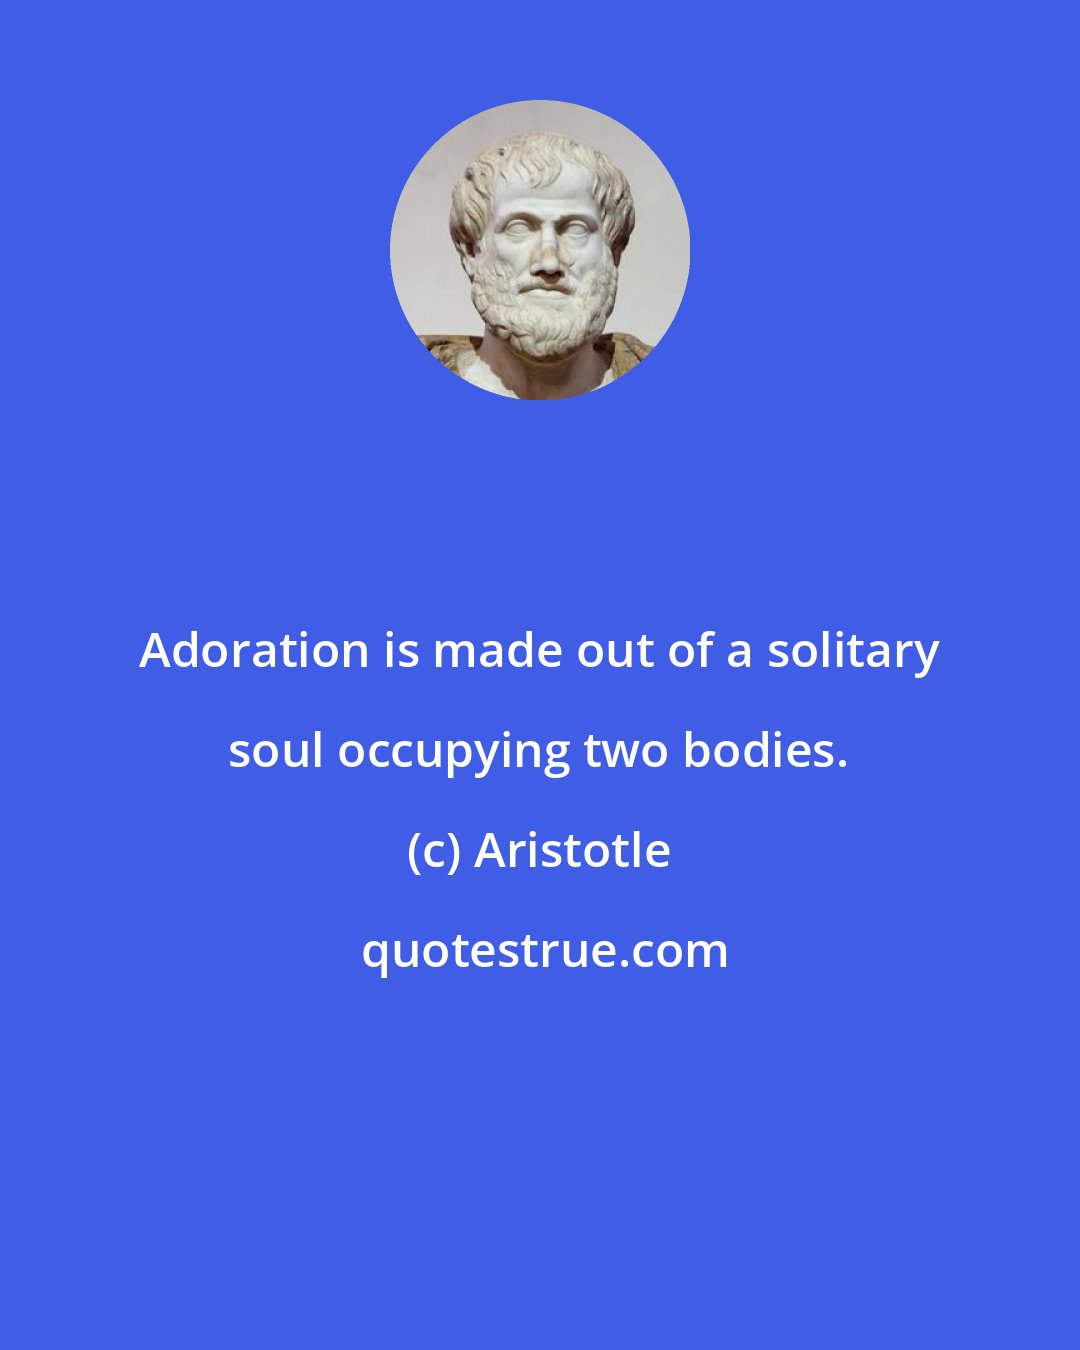 Aristotle: Adoration is made out of a solitary soul occupying two bodies.